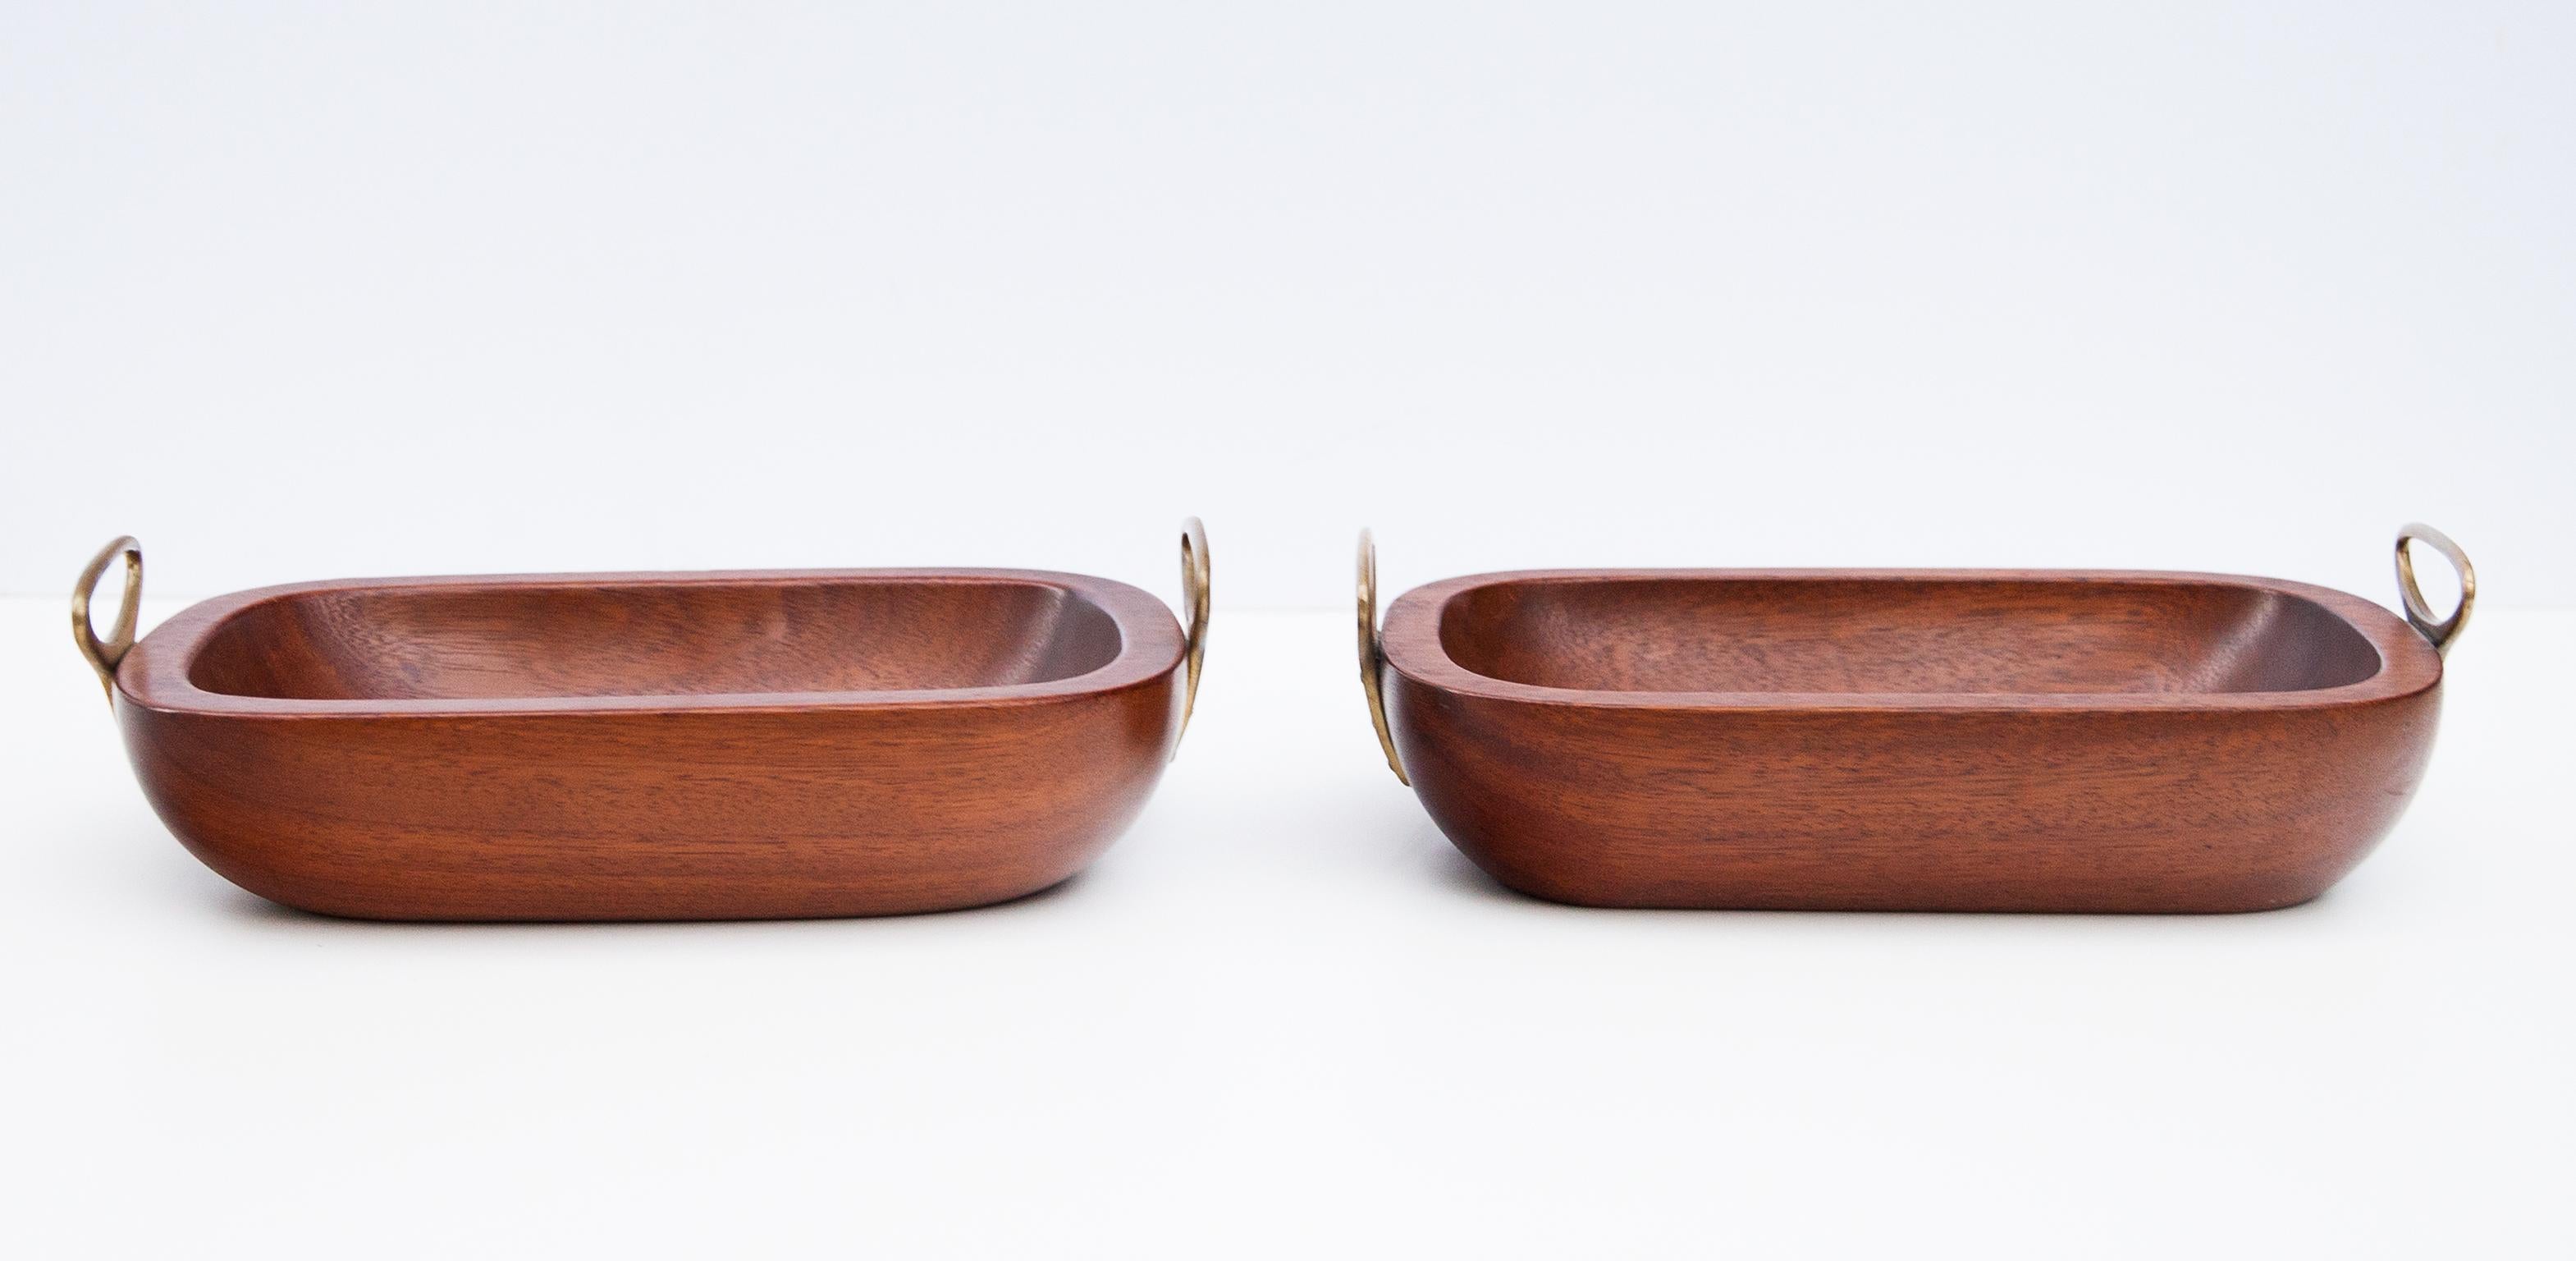 Original 1950s bowl element made of solid teak wood and and two solid brass handles on the sides. This fantastic piece was designed by Carl Auböck in the 1950s, and handcrafted in his Workshop in Vienna, Austria in the 1950s. It is a very rare and